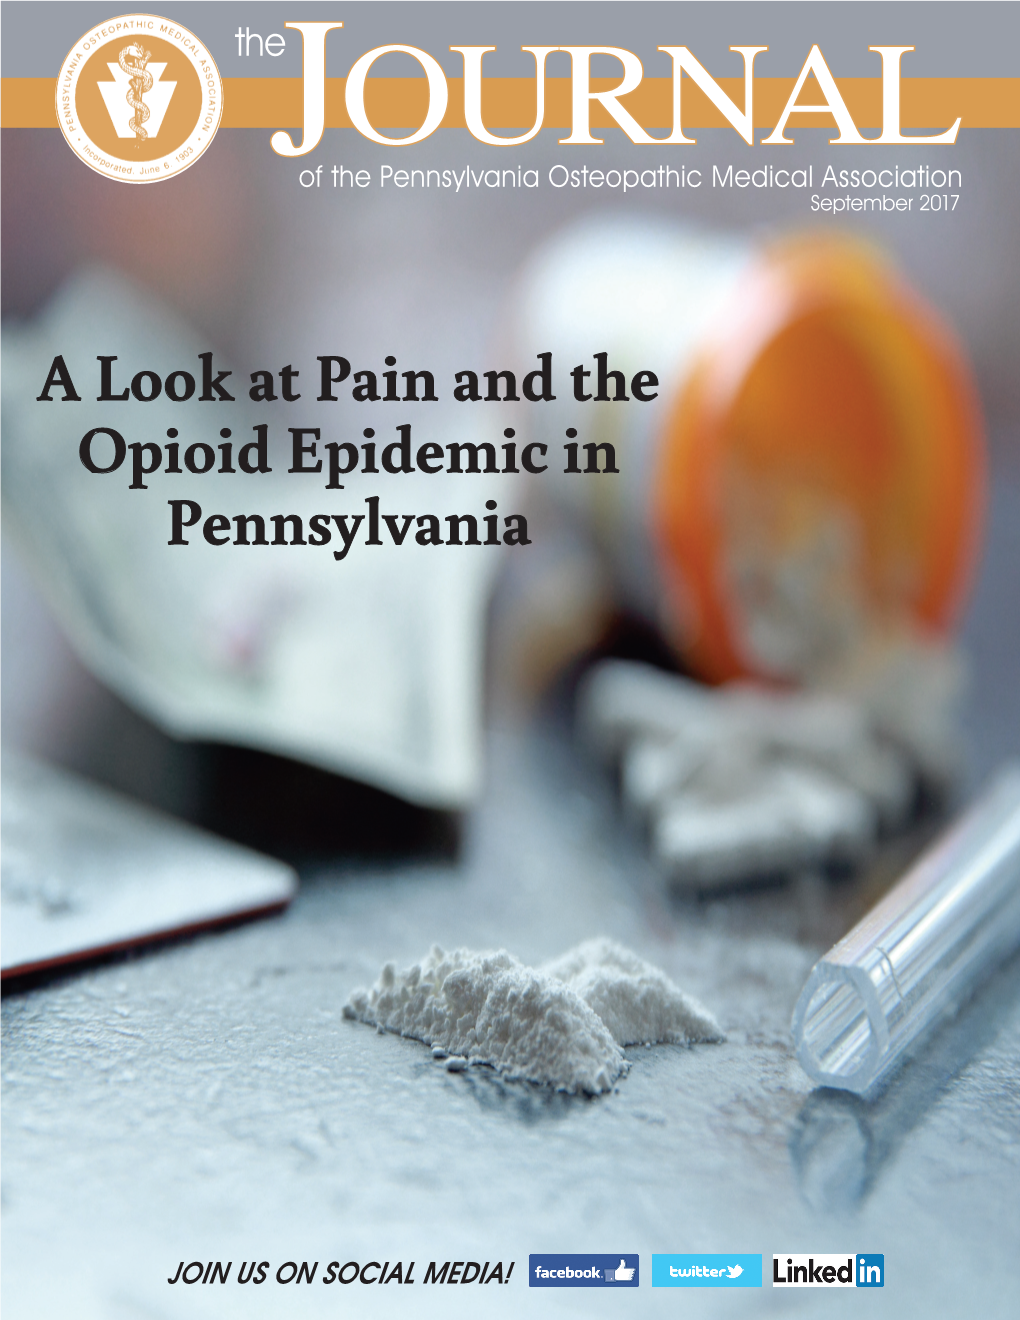 A Look at Pain and the Opioid Epidemic in Pennsylvania